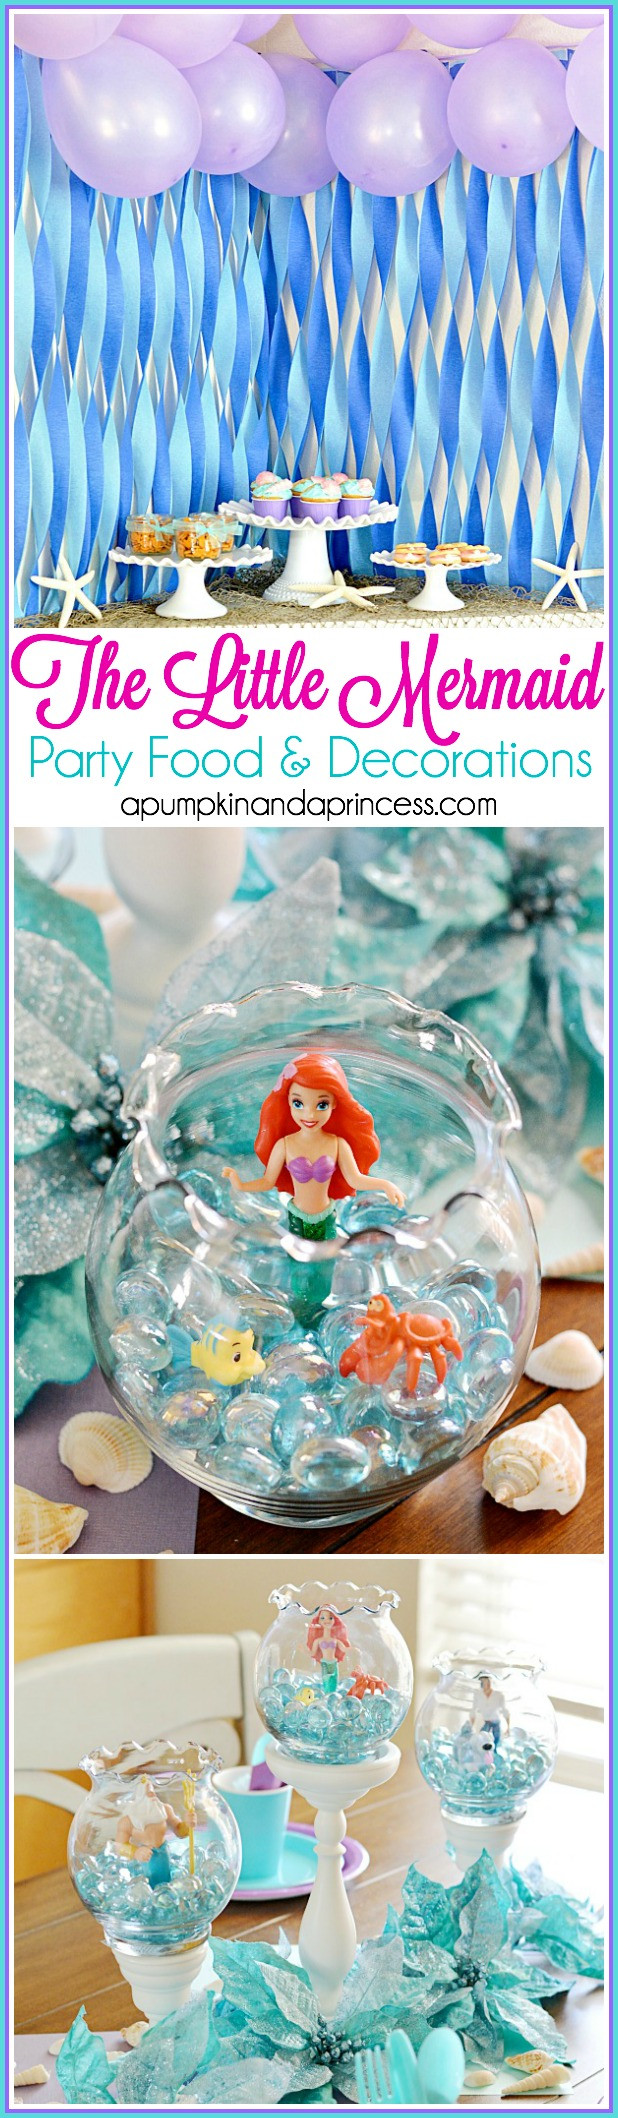 Party Ideas Little Mermaid
 The Little Mermaid Party A Pumpkin And A Princess